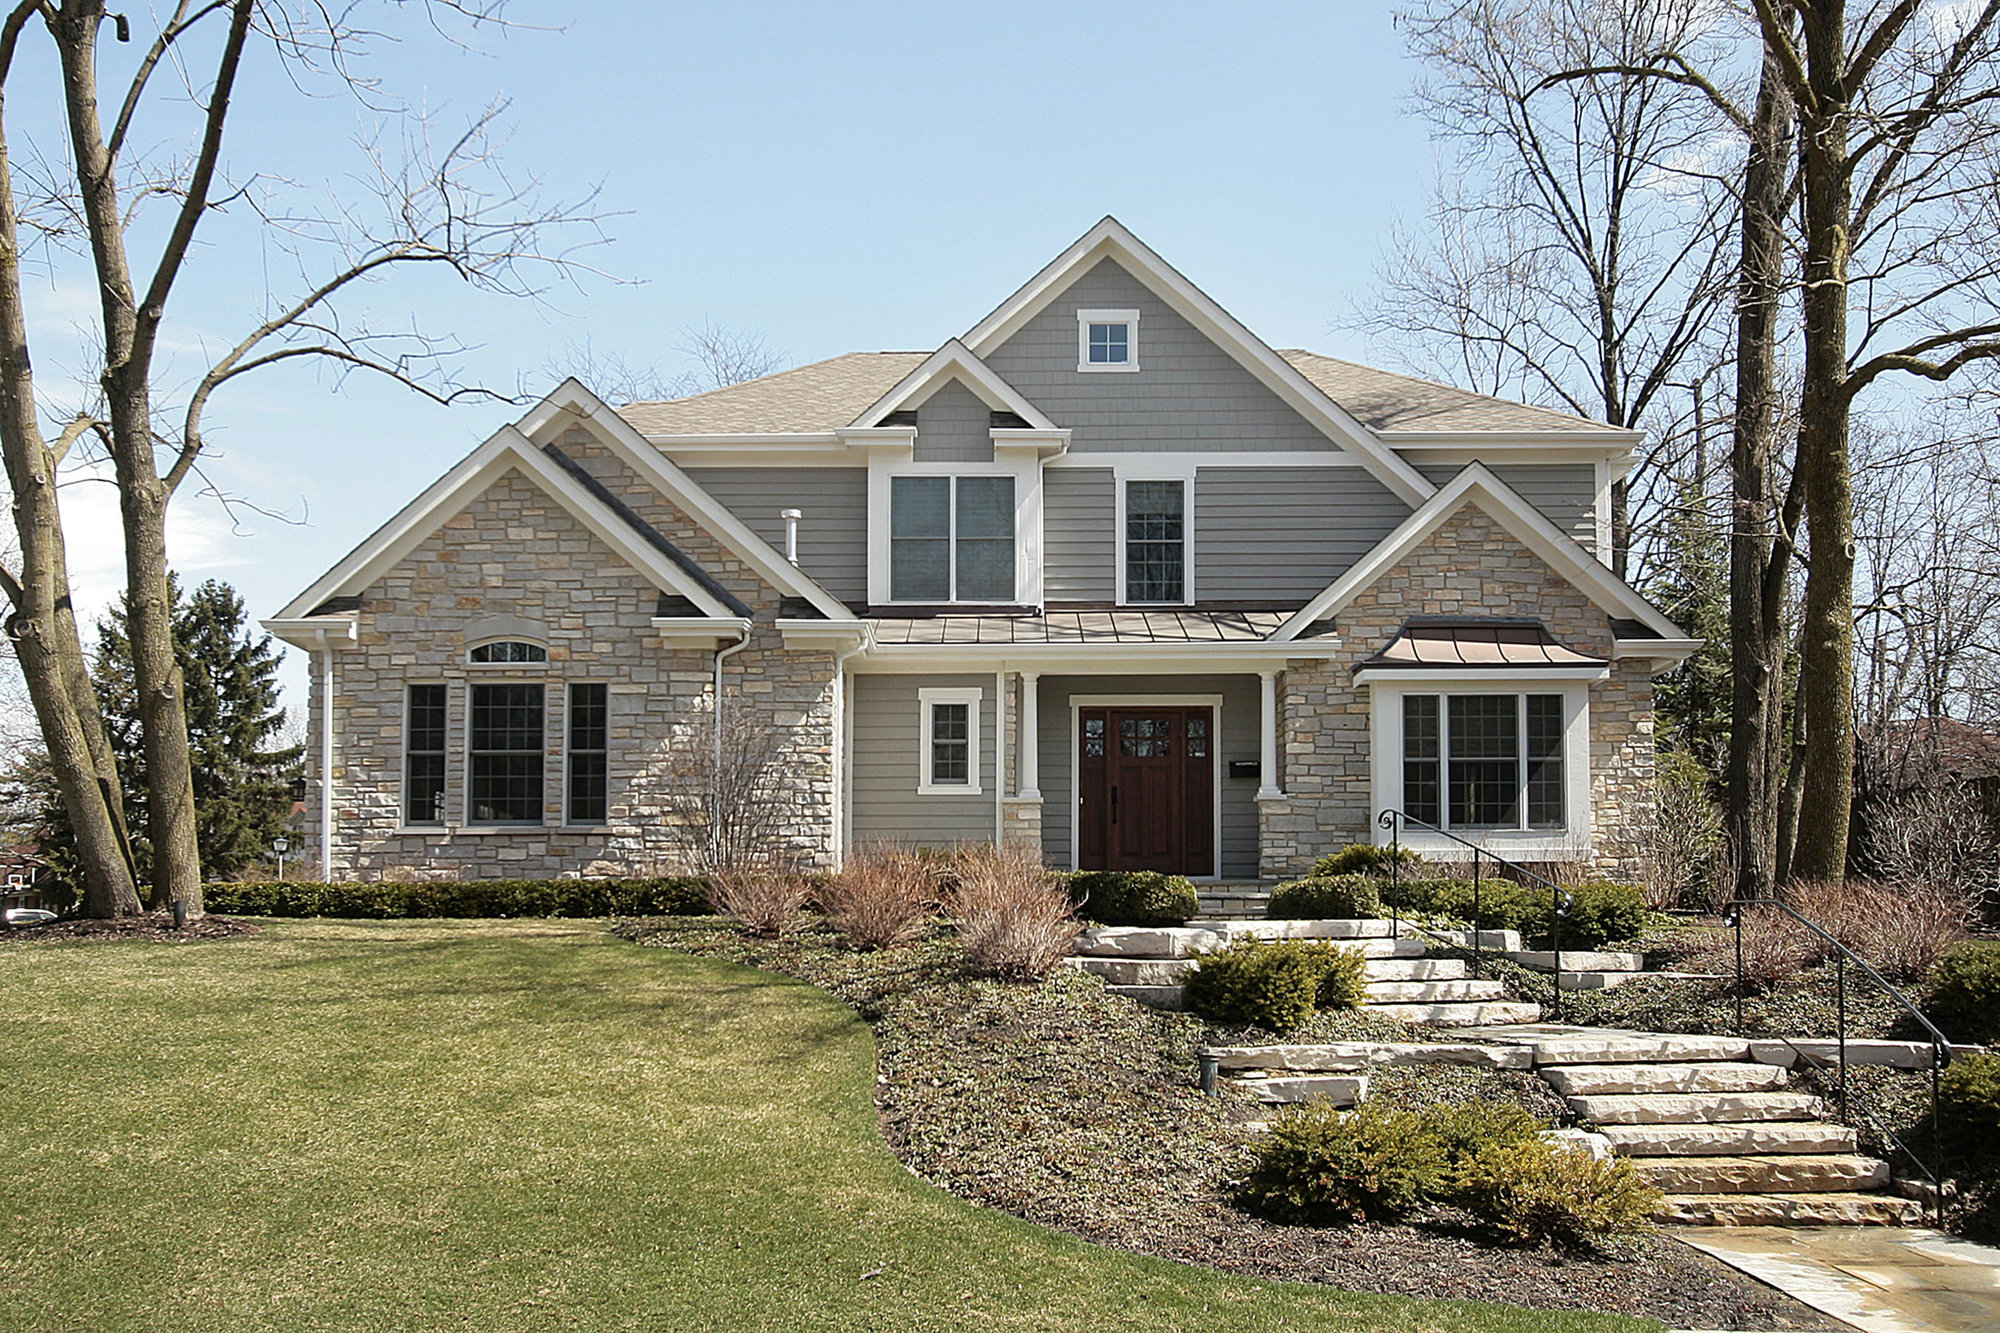 Should You Buy a House with a Stone Facade?